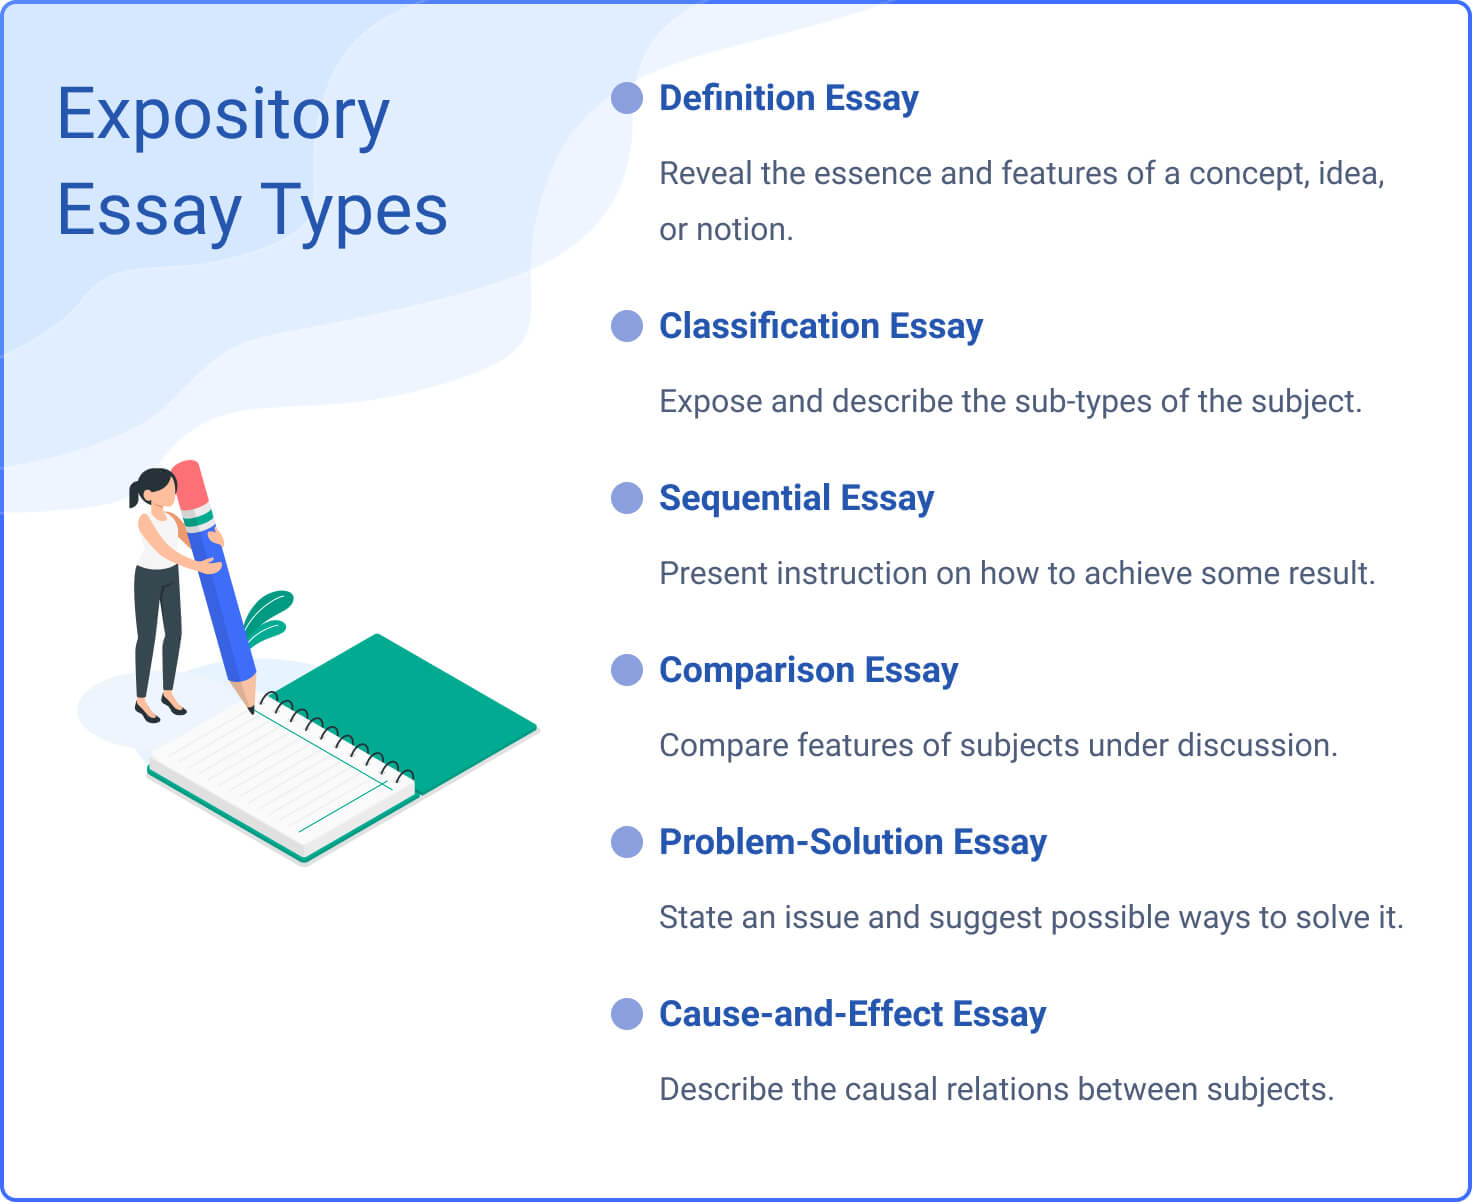 The picture contains brief descriptions of exposutory essay types.